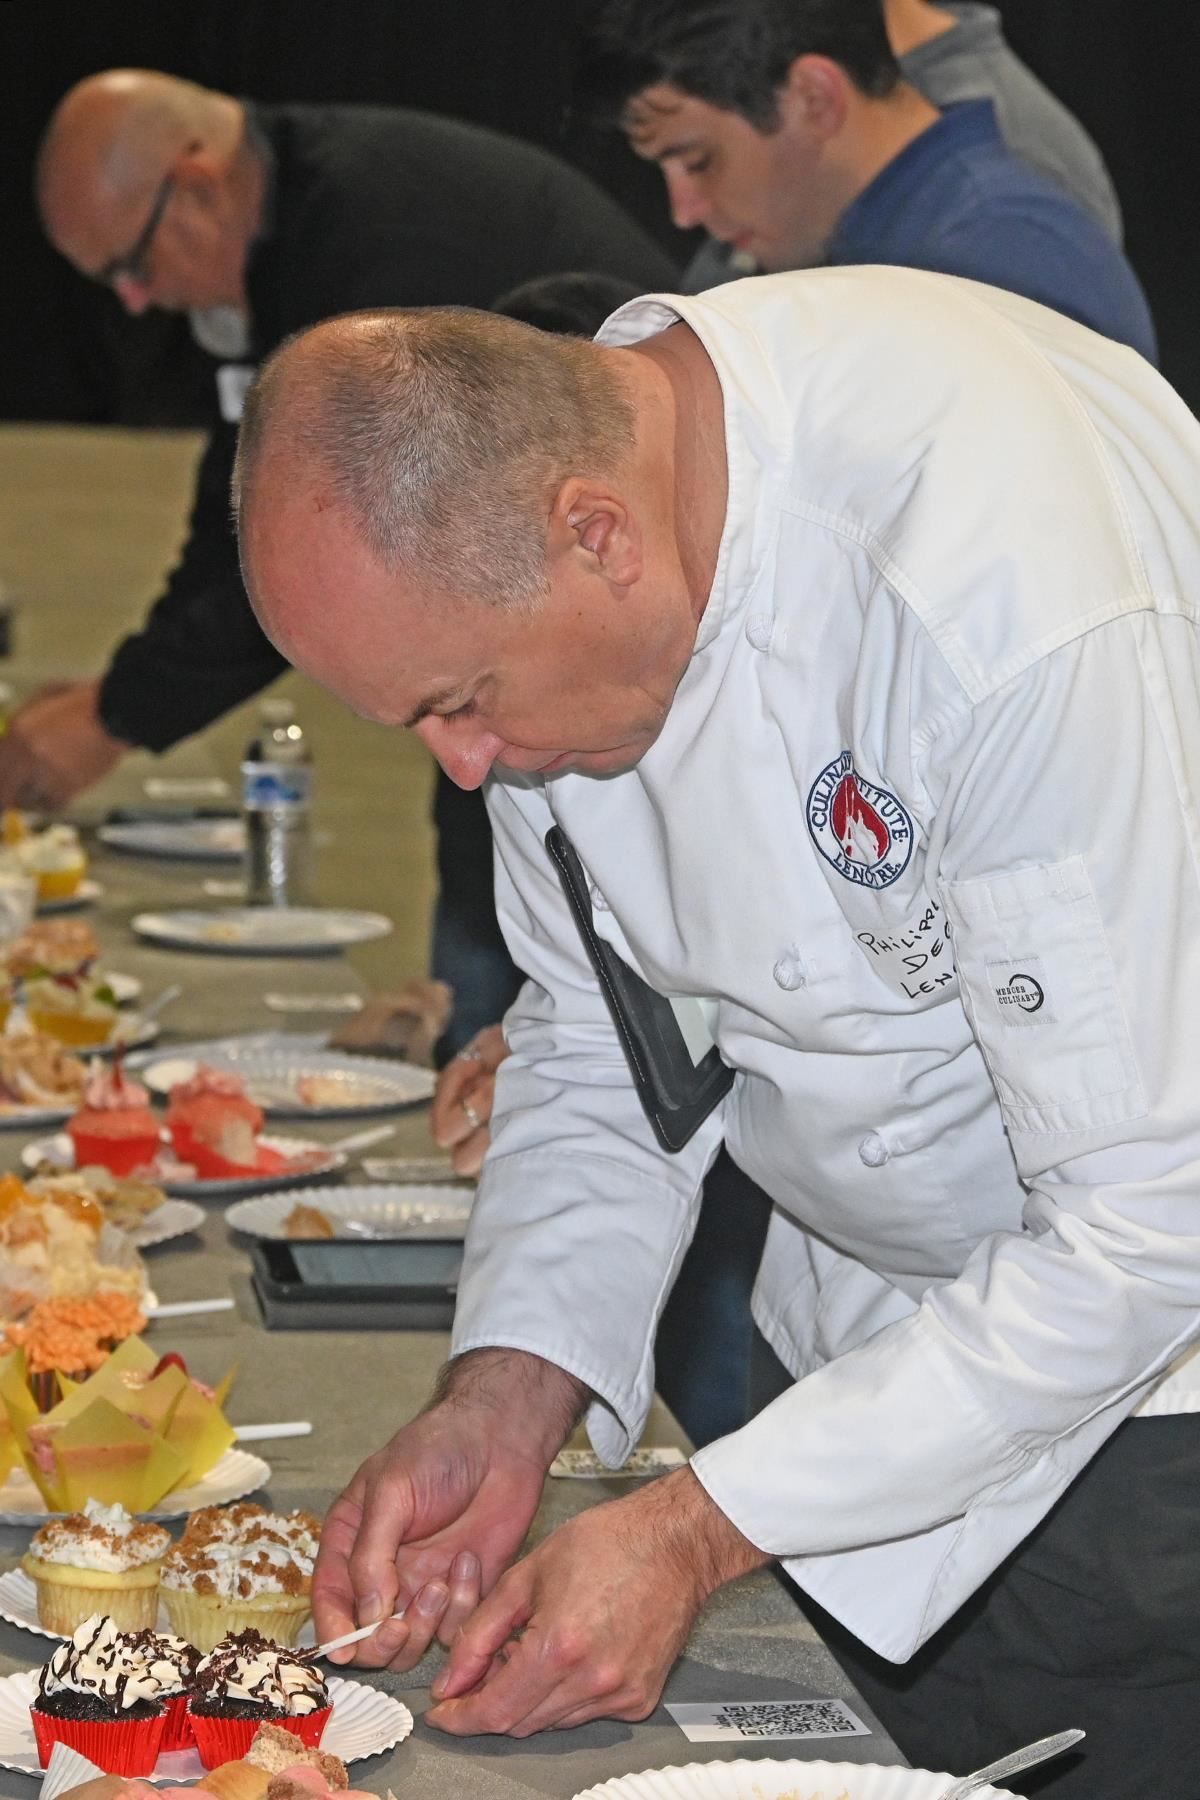 Philippe Dege, a pastry chef and instructor at the Culinary Institute Lenotre, judges cupcakes at the Cupcake Battle.